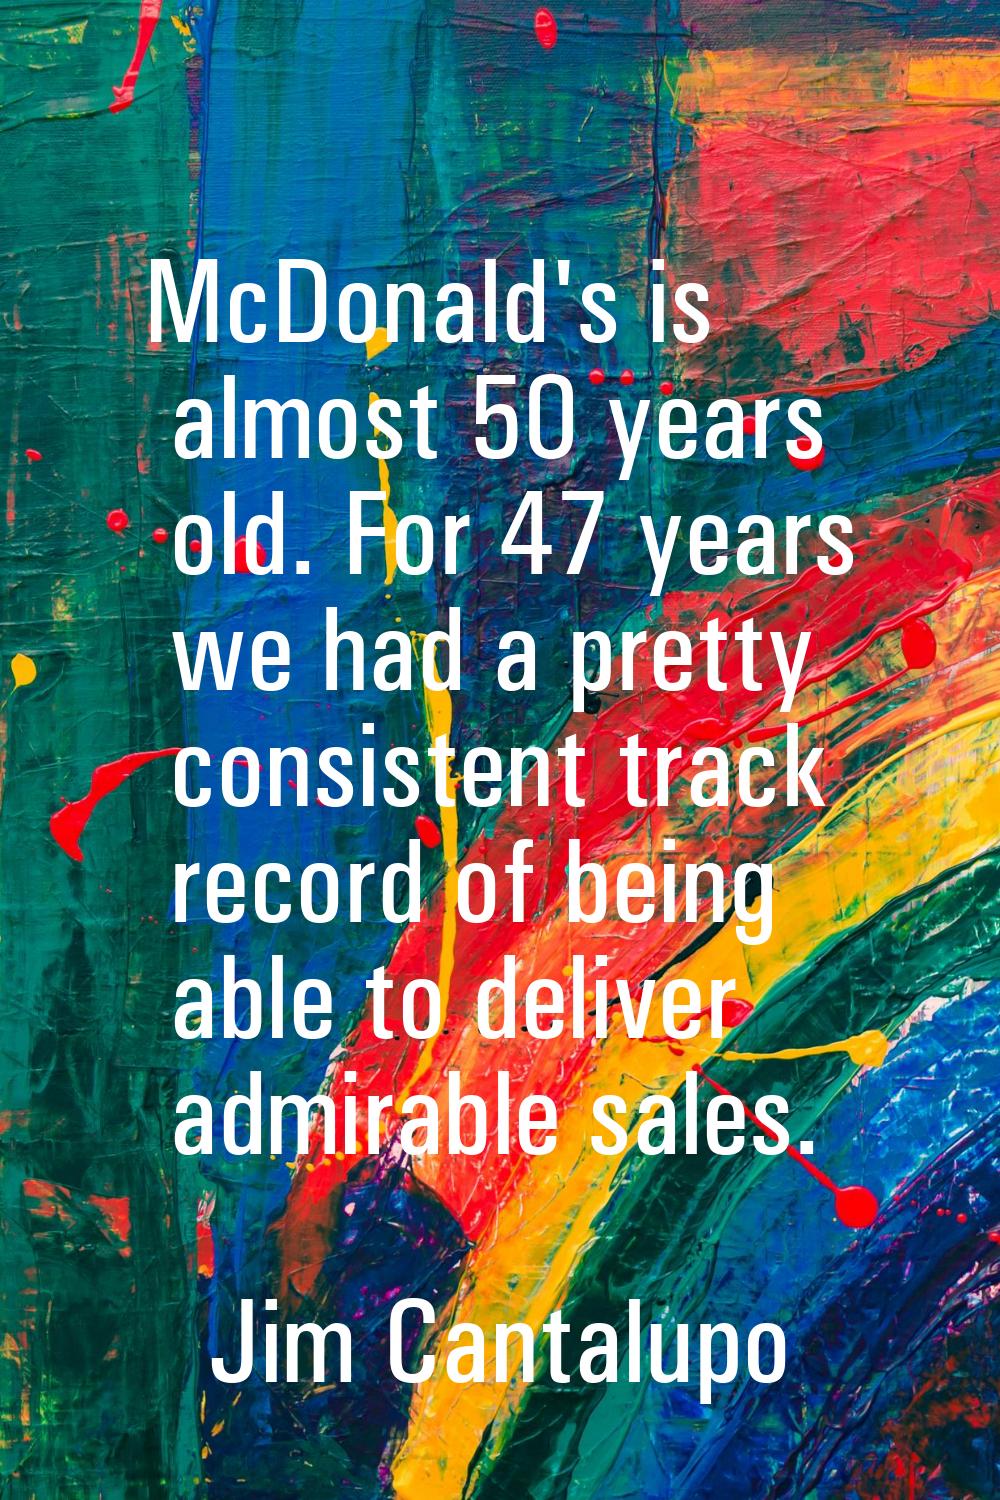 McDonald's is almost 50 years old. For 47 years we had a pretty consistent track record of being ab